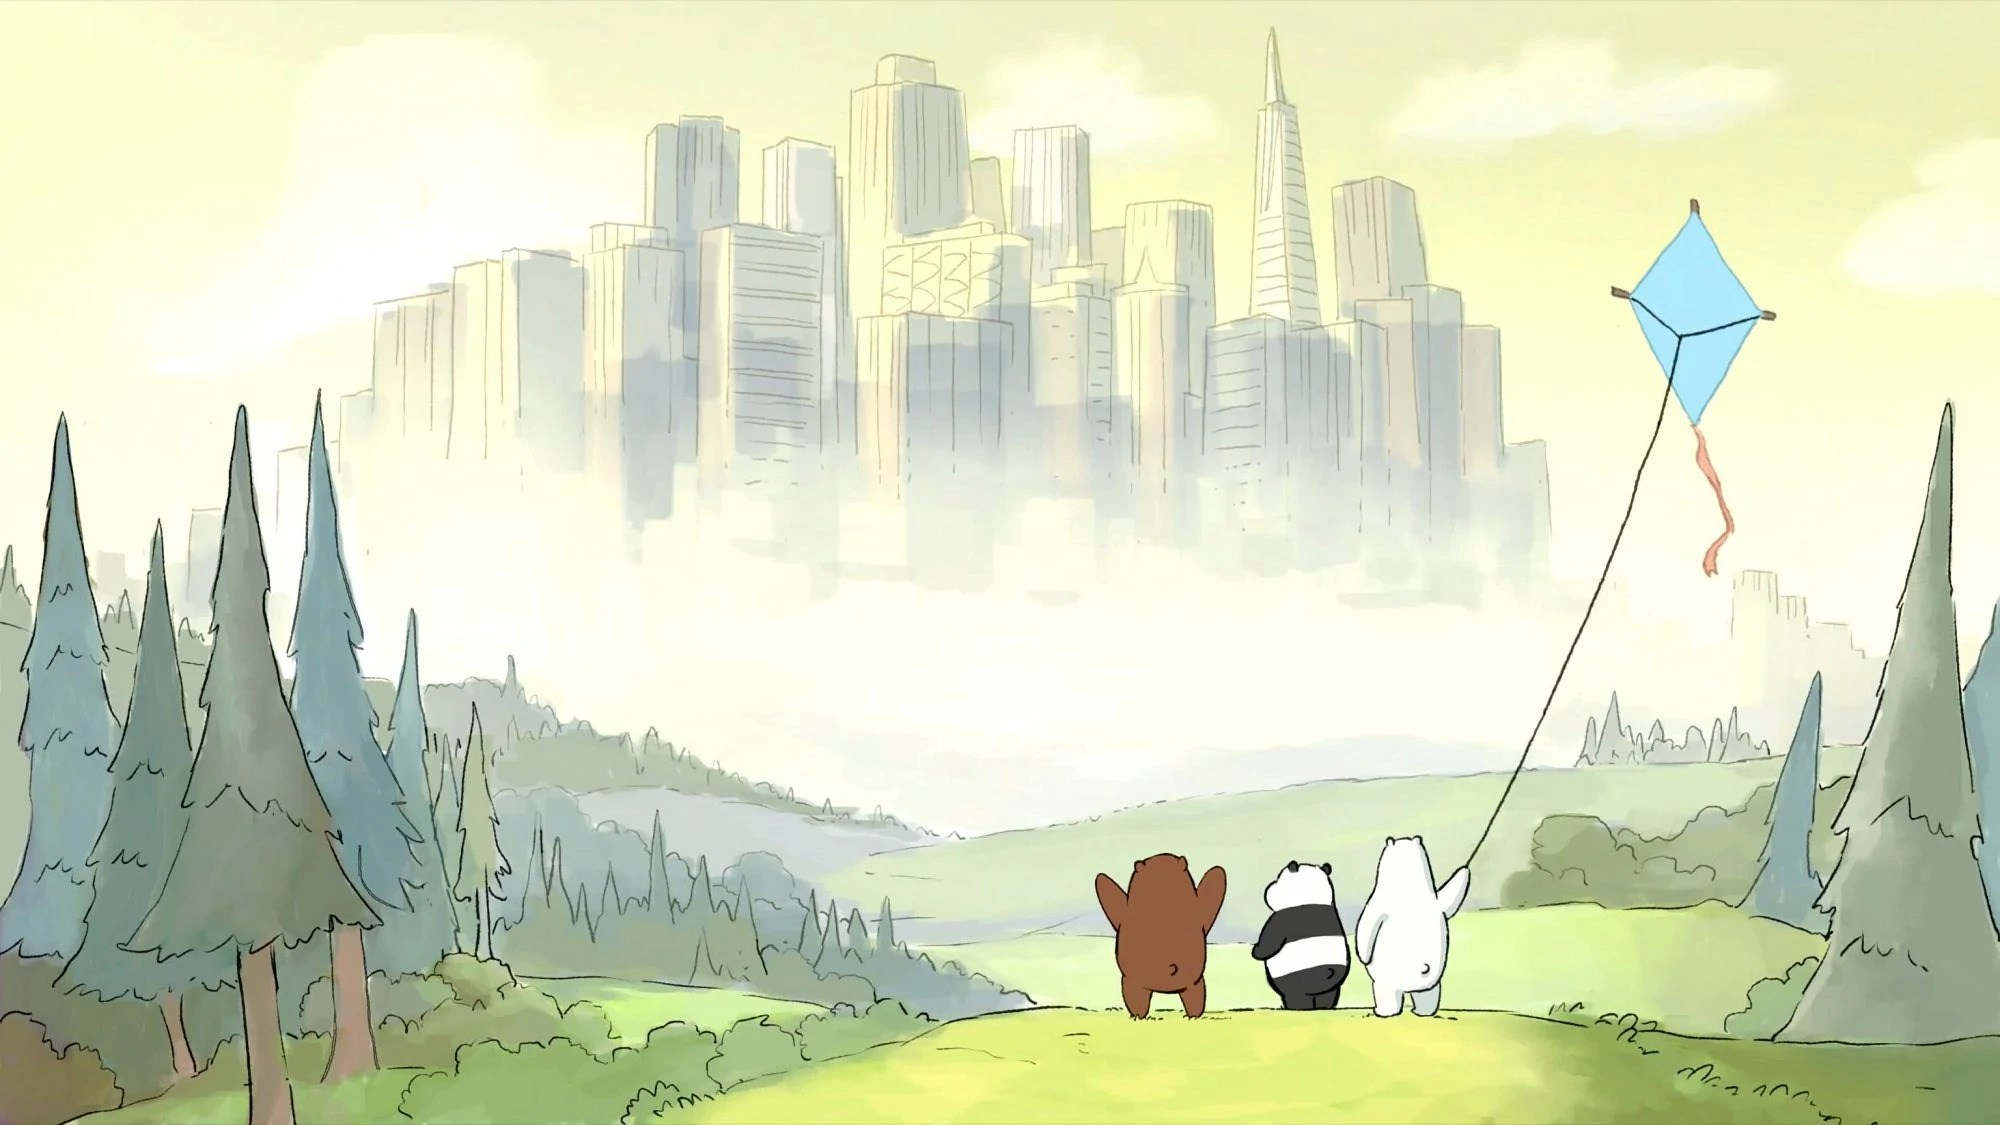 TV Show We Bare Bears HD Wallpaper | Background Image